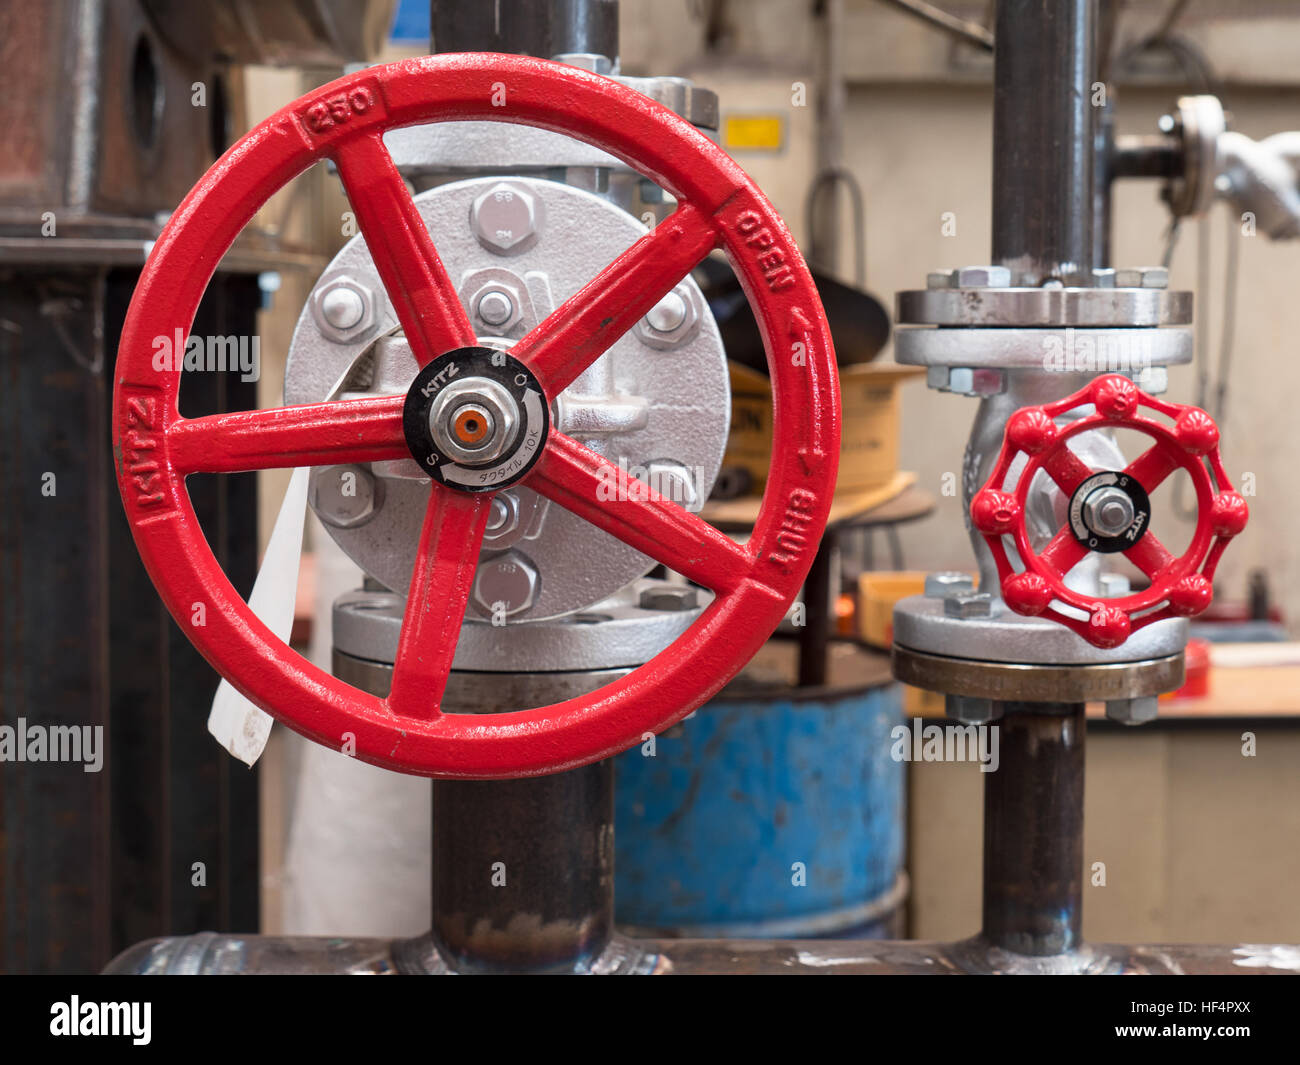 Two valves in industrial setting. Shallow depth of field with the nearest valve in focus. Stock Photo